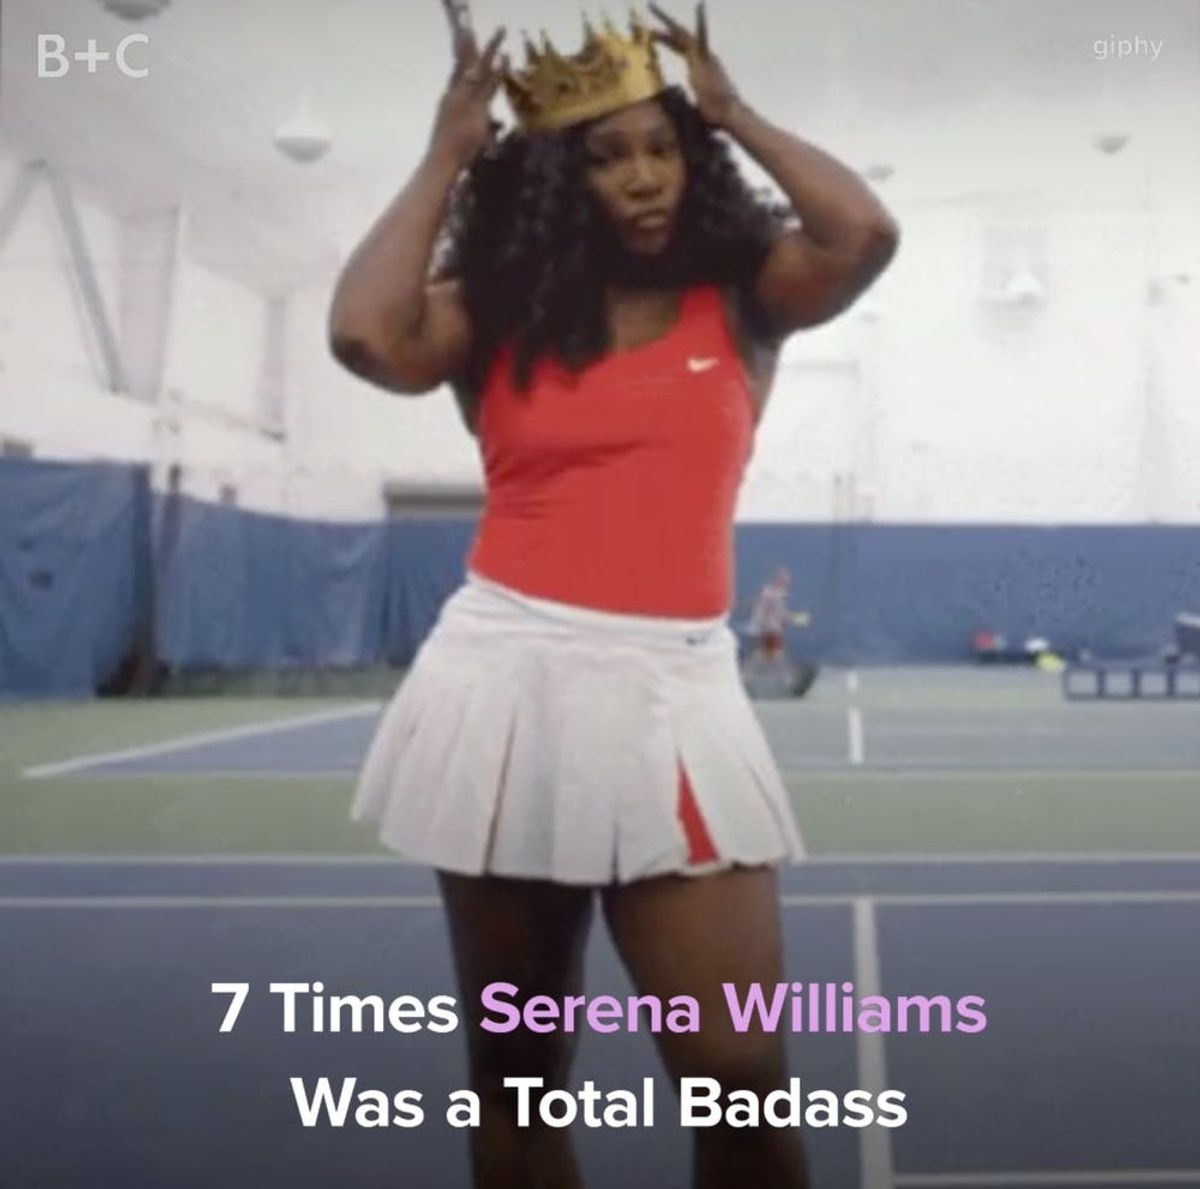 7 Times Serena Williams Was a Total Badass